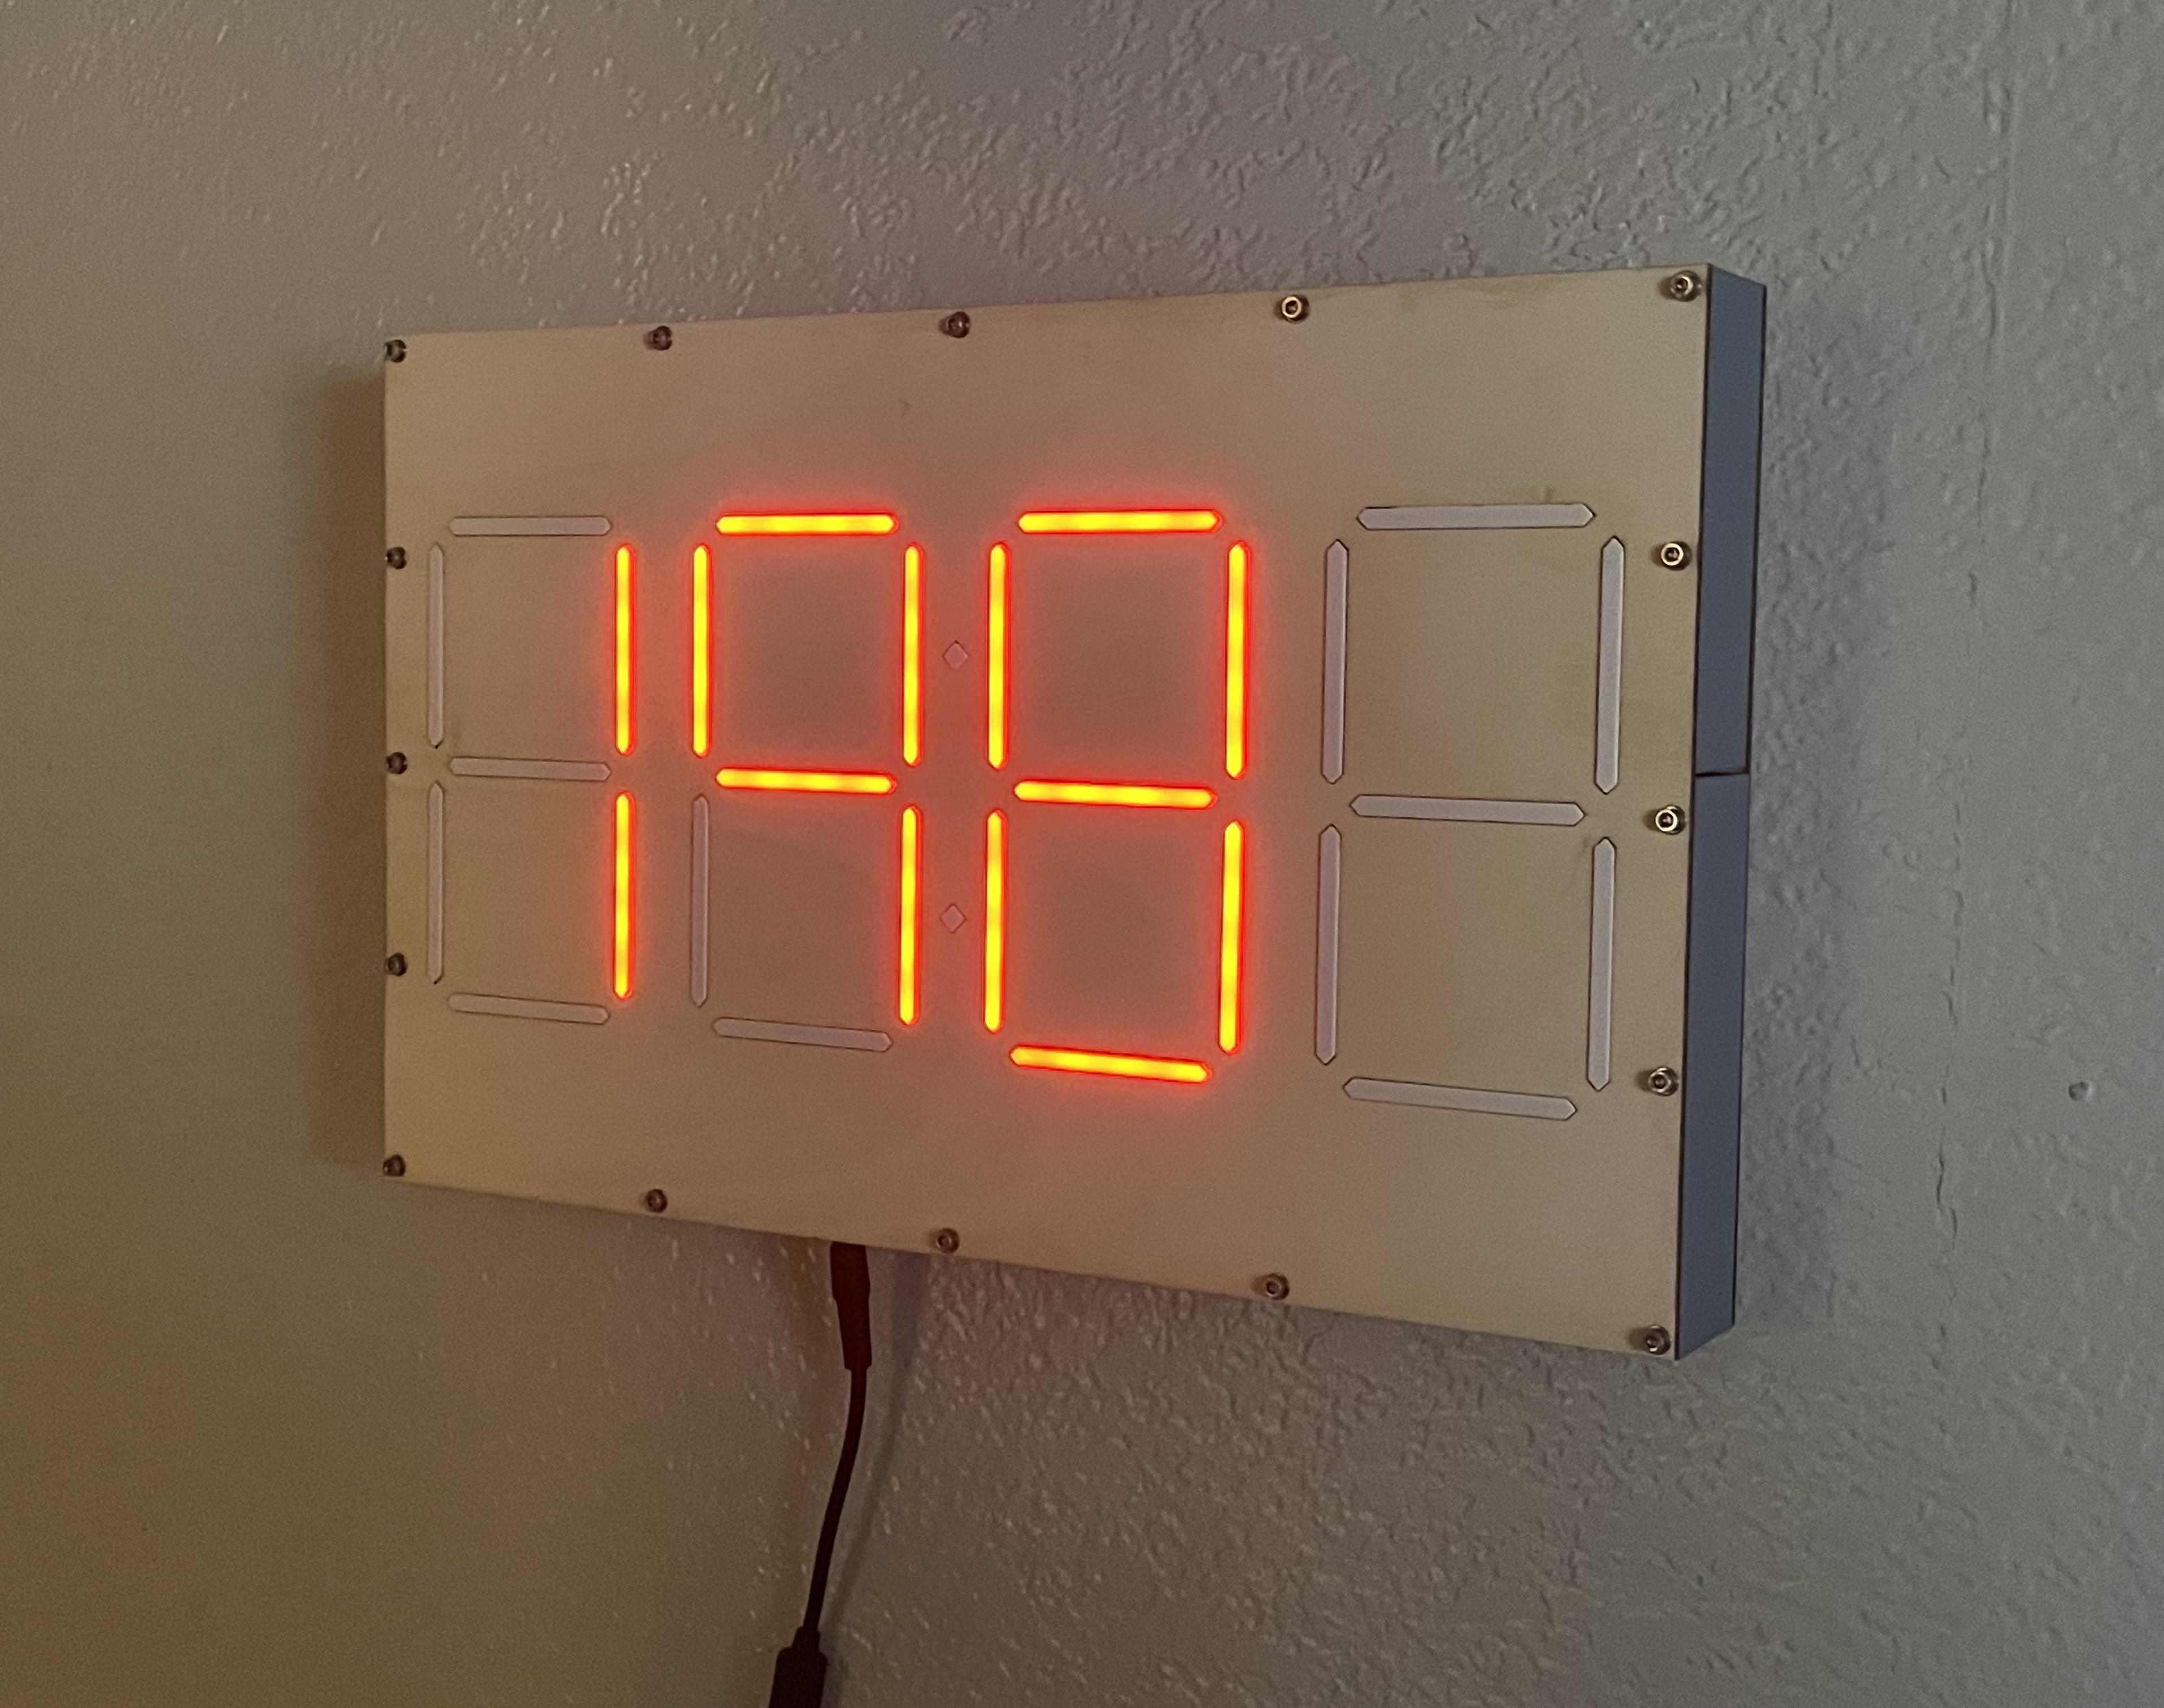 SubscriberBoard - a Home Assistant-connected Oversized 7-segment Display